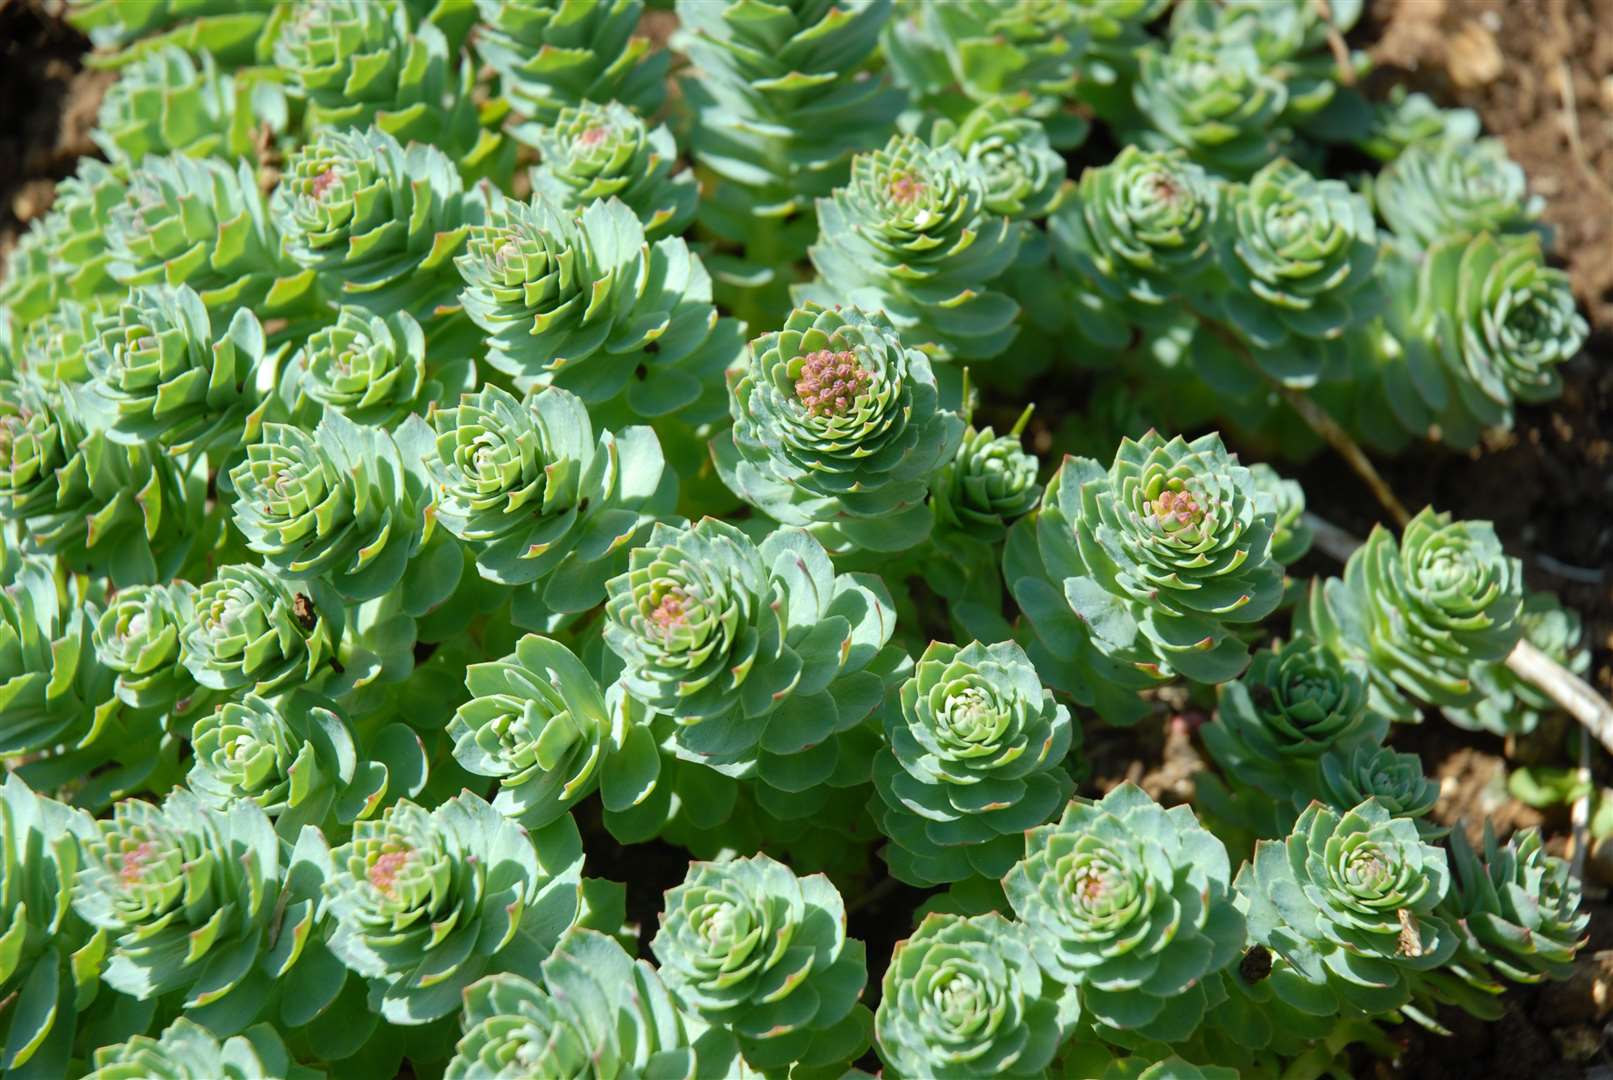 Rhodiola rosea also known as rose root or artic root